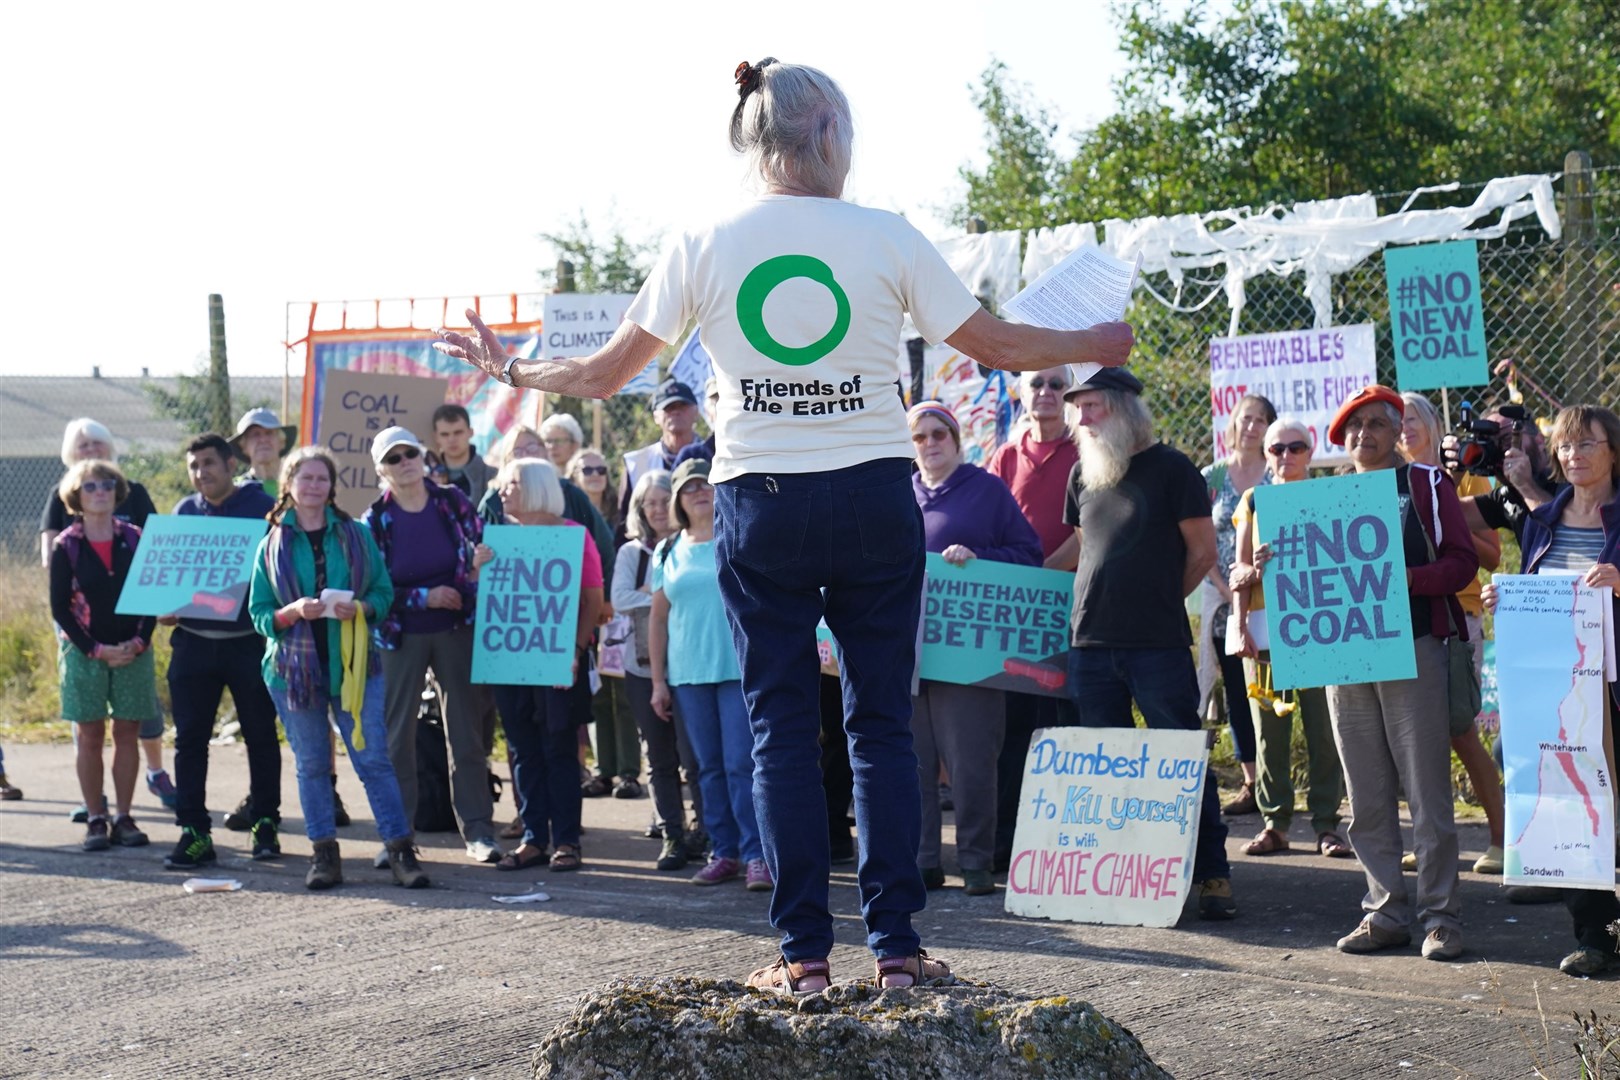 Demonstrators outside the site of a proposed coal mine in West Cumbria (Owen Humphreys/ PA)